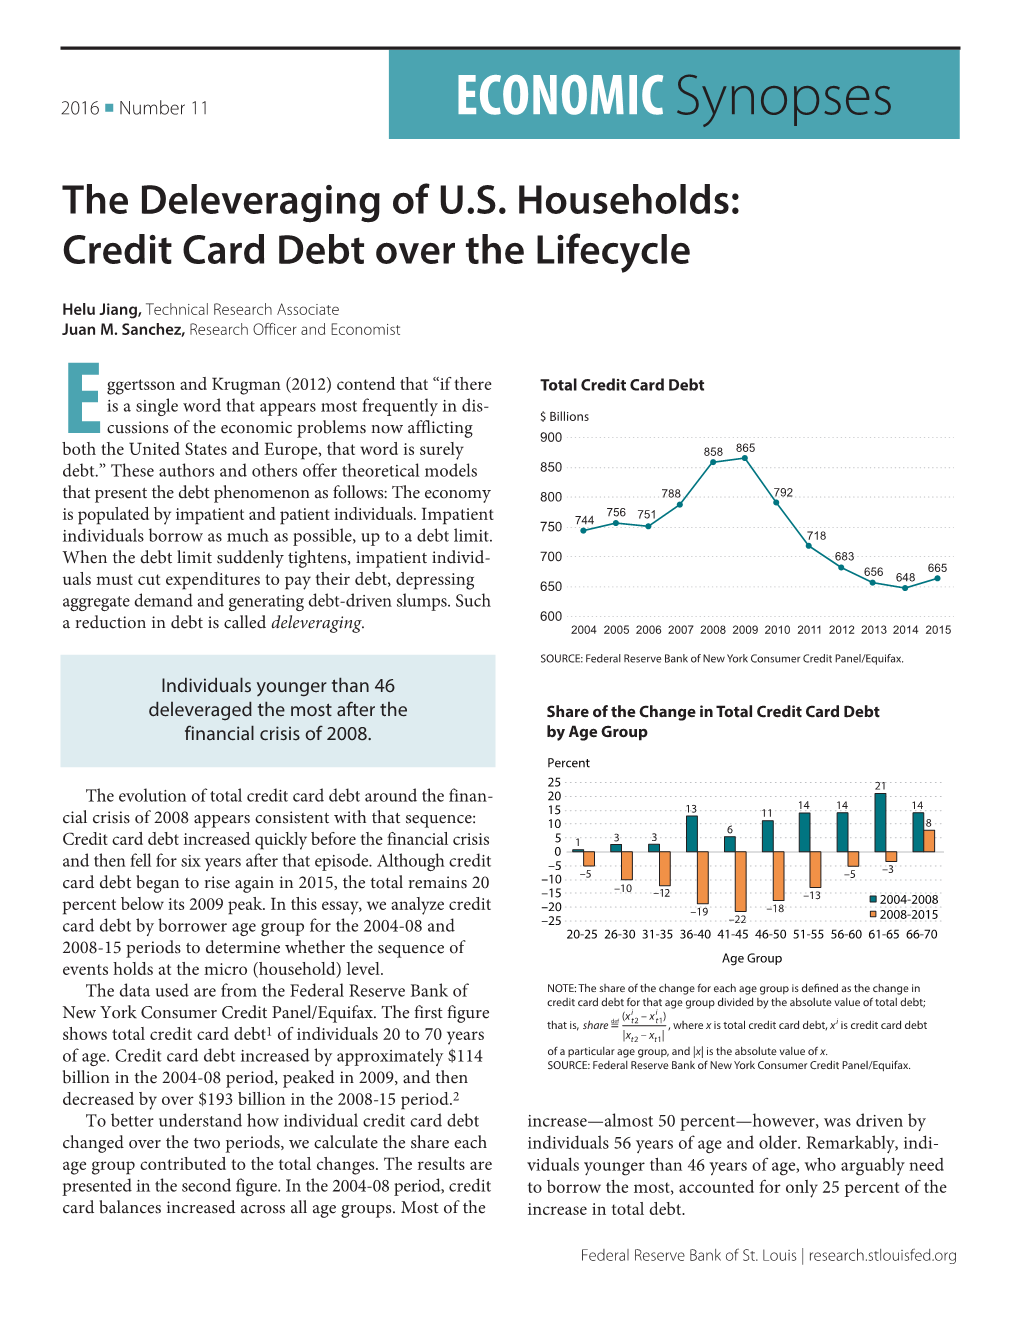 The Deleveraging of U.S. Households: Credit Card Debt Over the Lifecycle